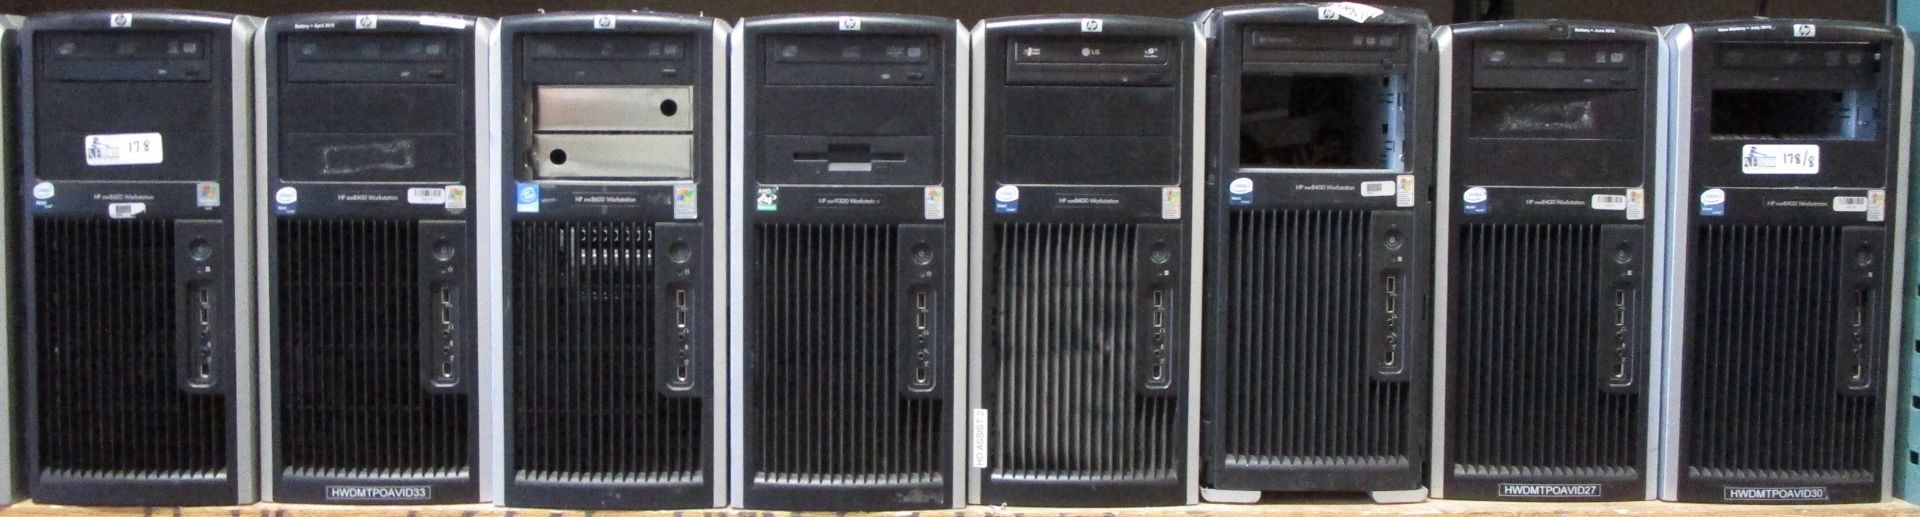 LOT OF 8 HP WORKSTATION COMPUTERS